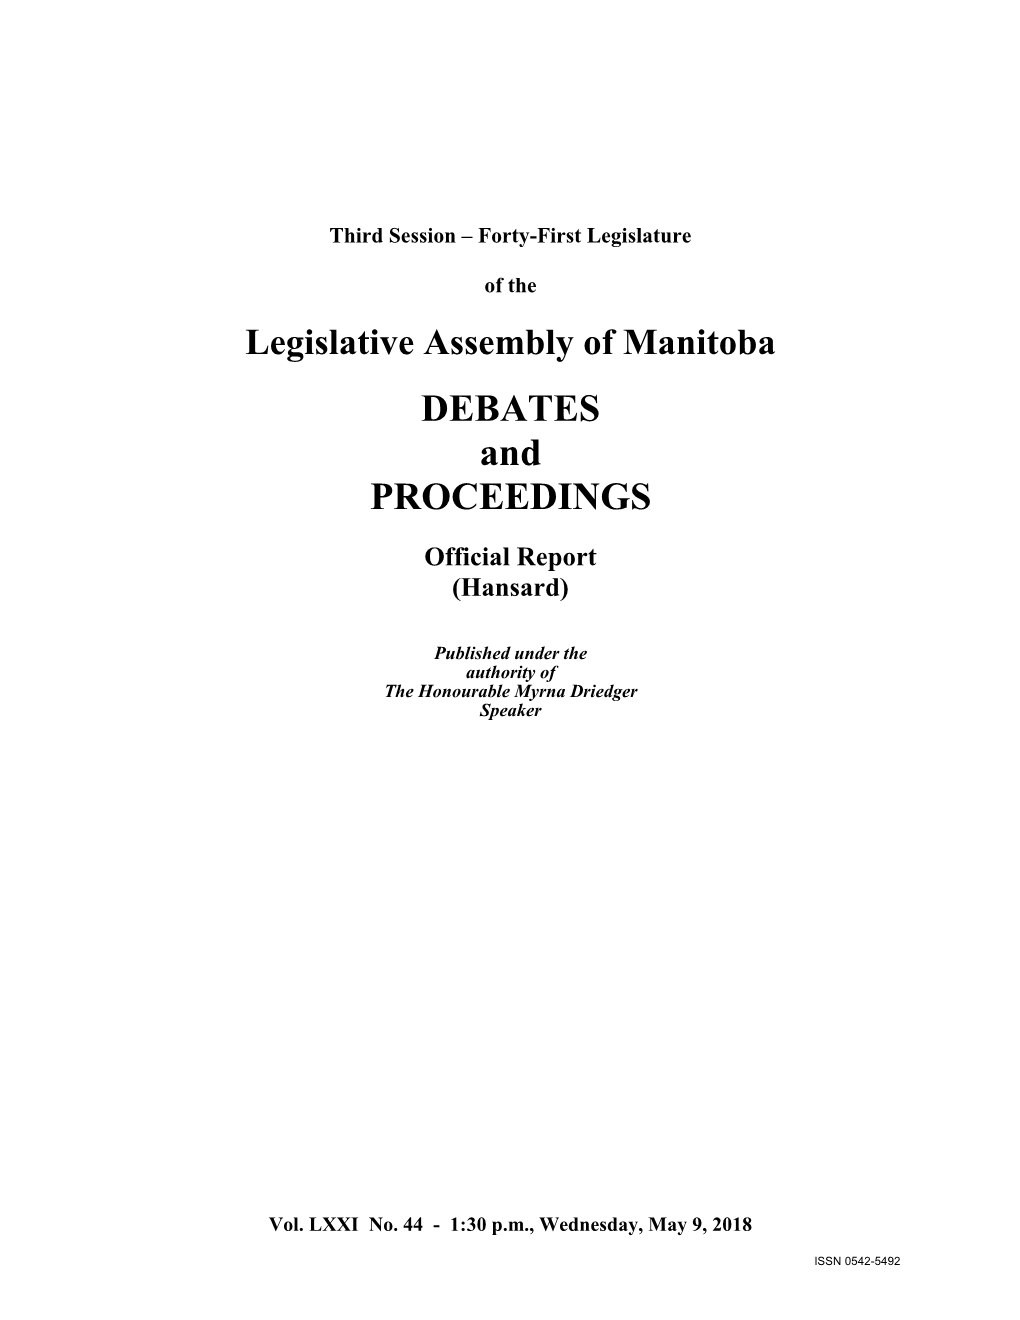 2112 LEGISLATIVE ASSEMBLY of MANITOBA May 9, 2018 Much of a Reduction There Was for Each Institution, So Grants Only